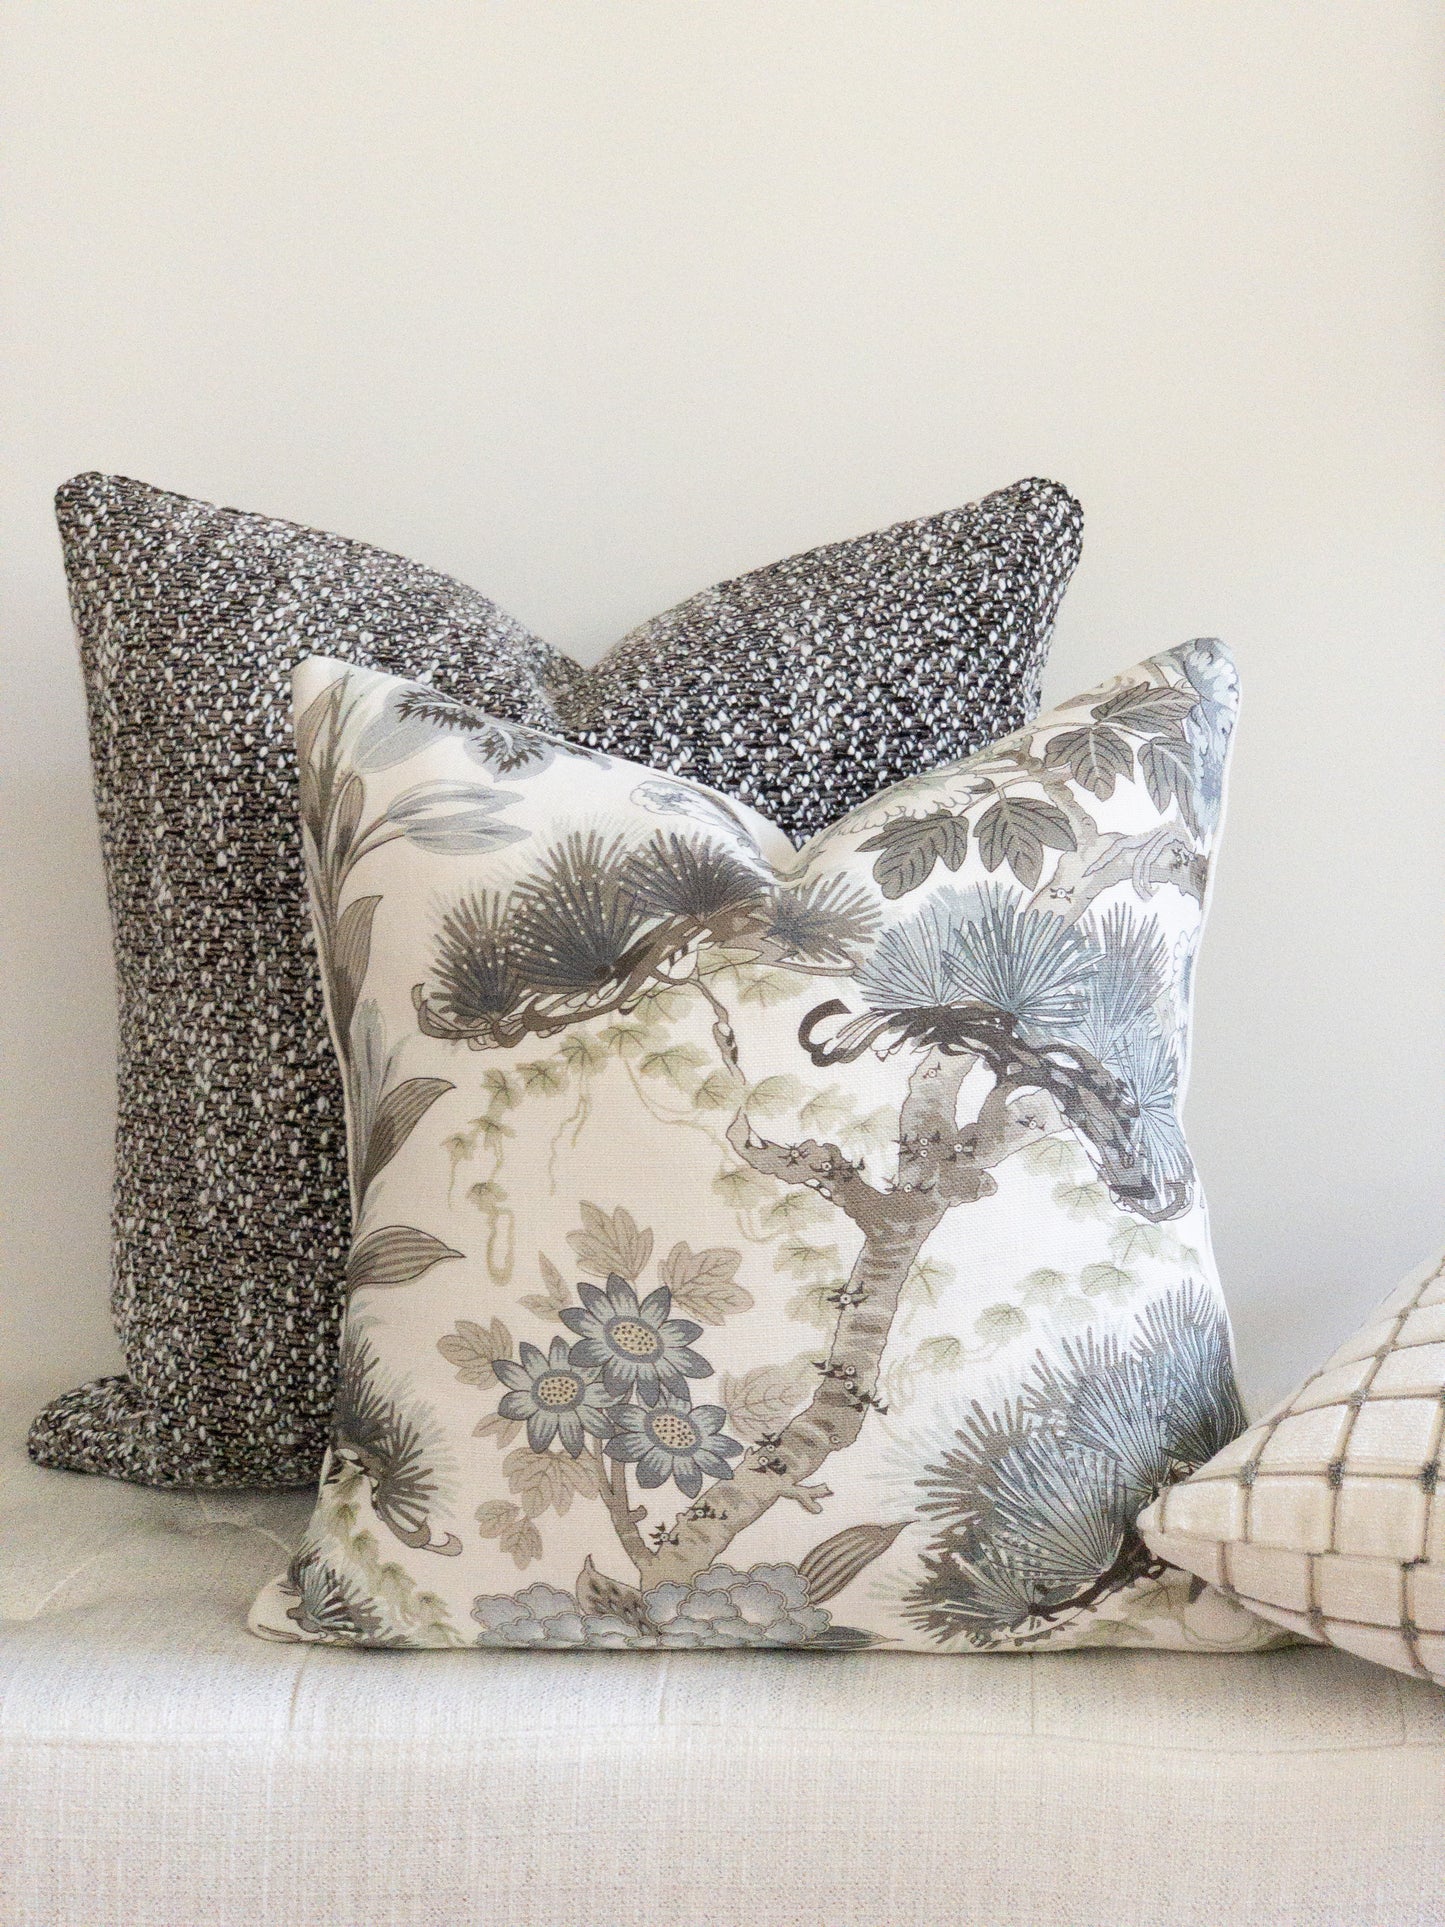 Blue and white floral accent pillow with brown and white boucle designer pillow